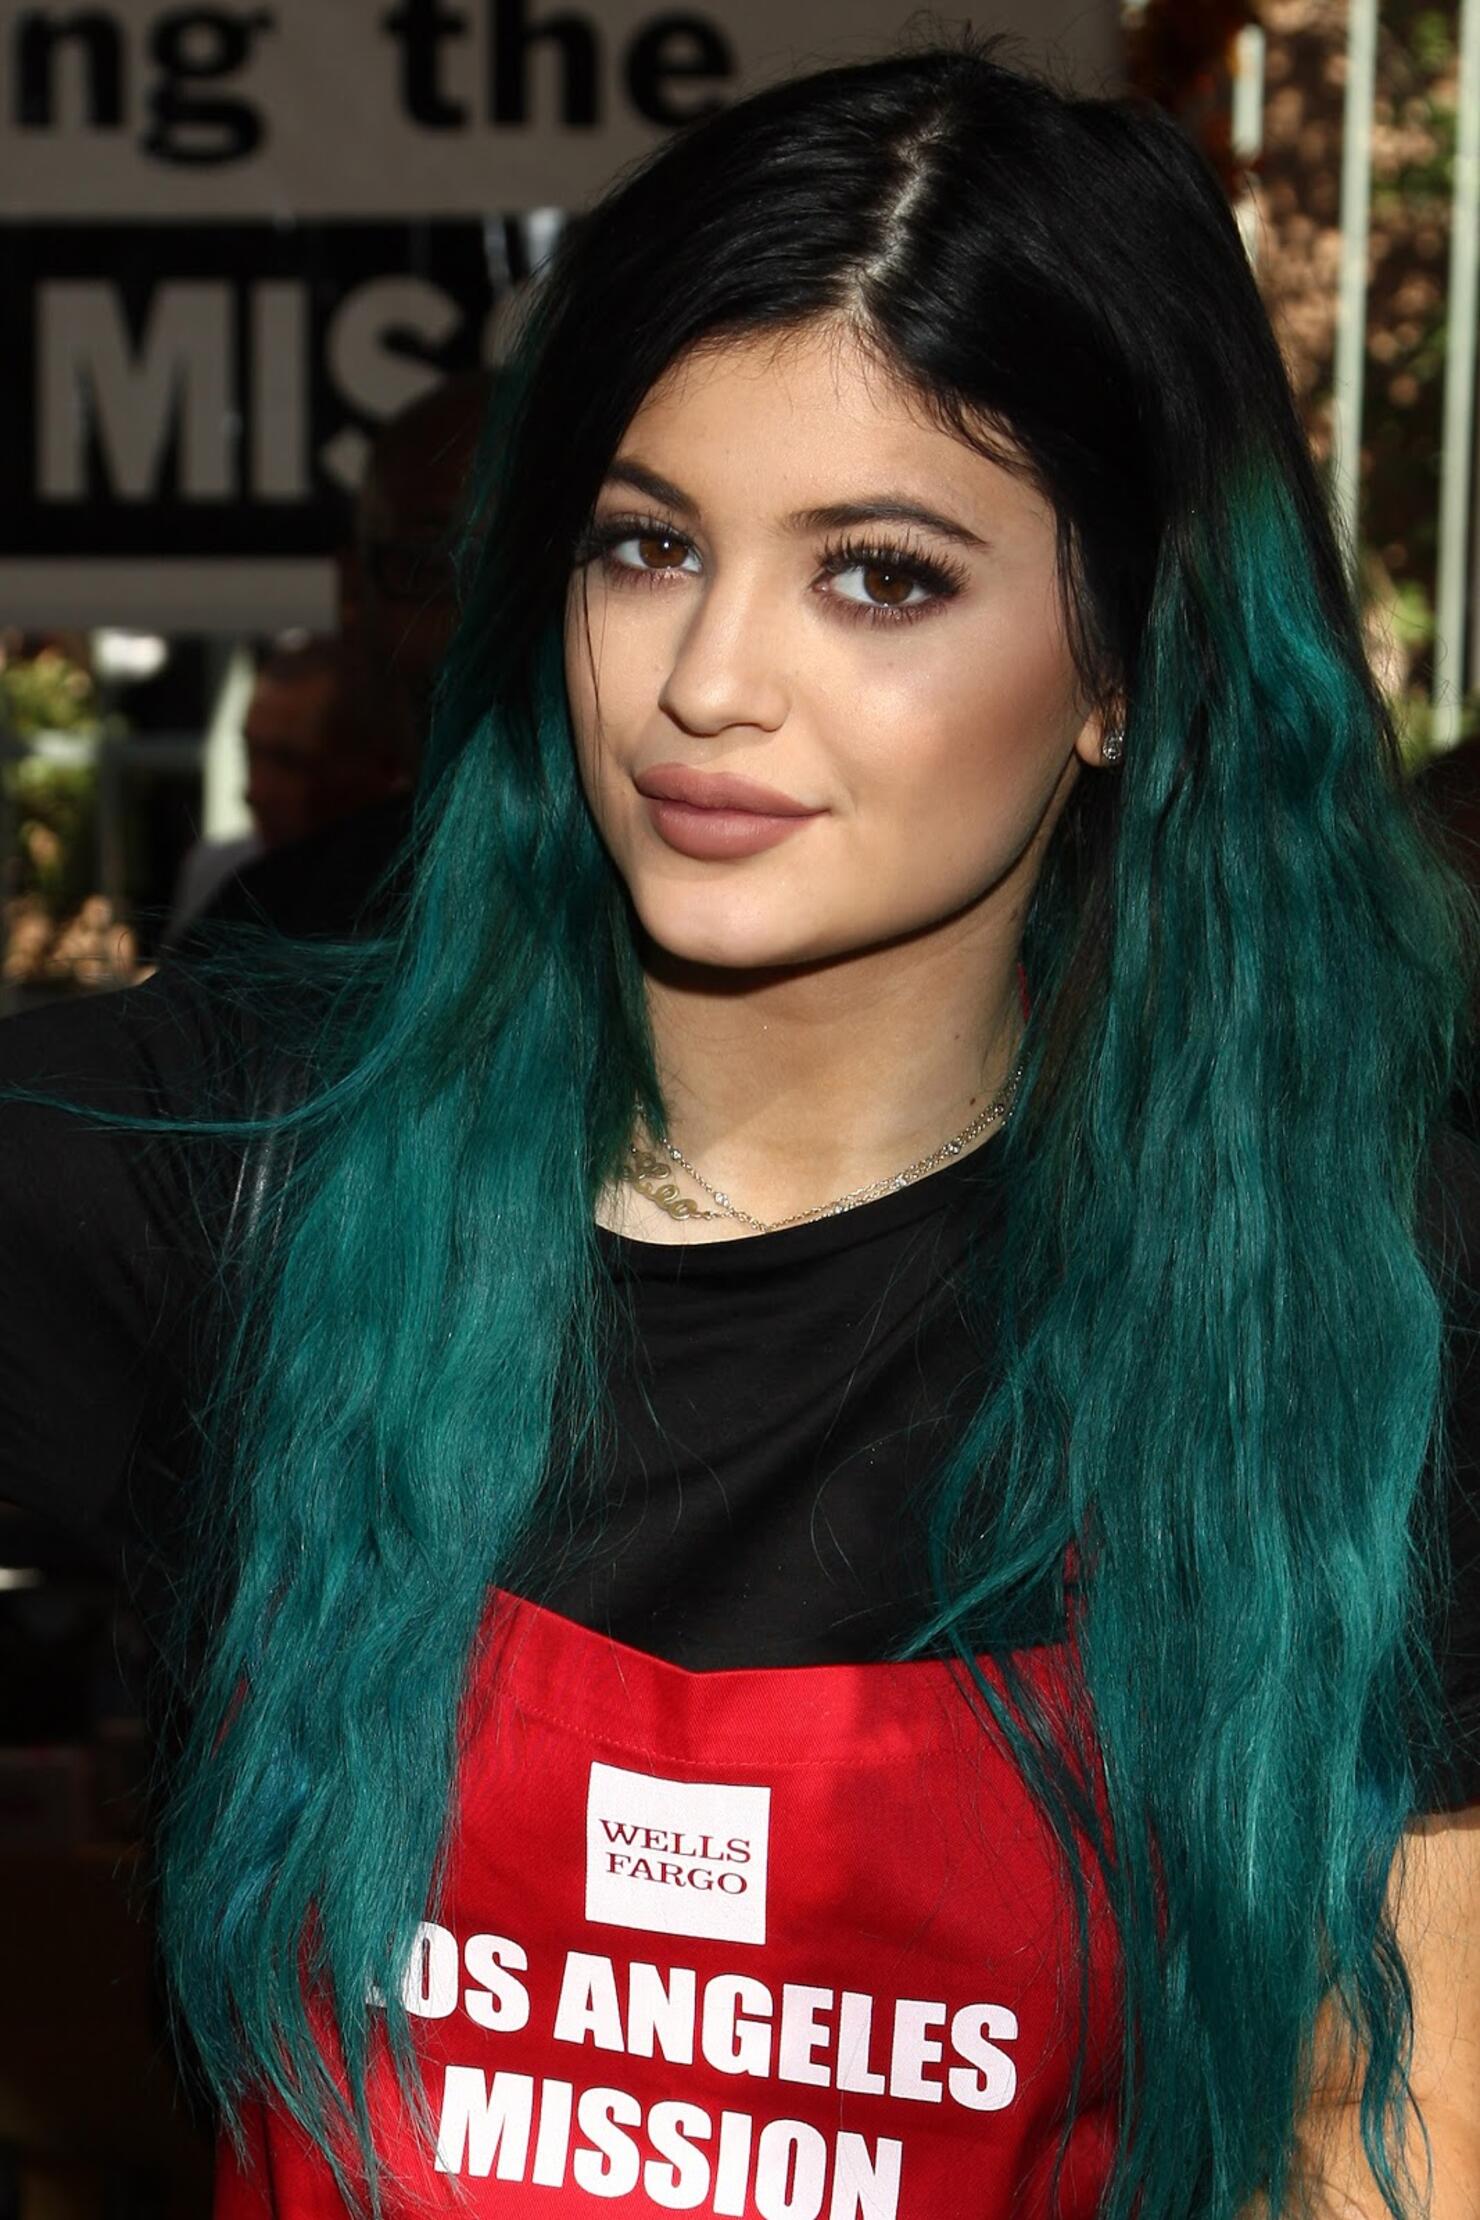 25 Celebs Who Have Rocked Hair Every Color Of The Rainbow | iHeart